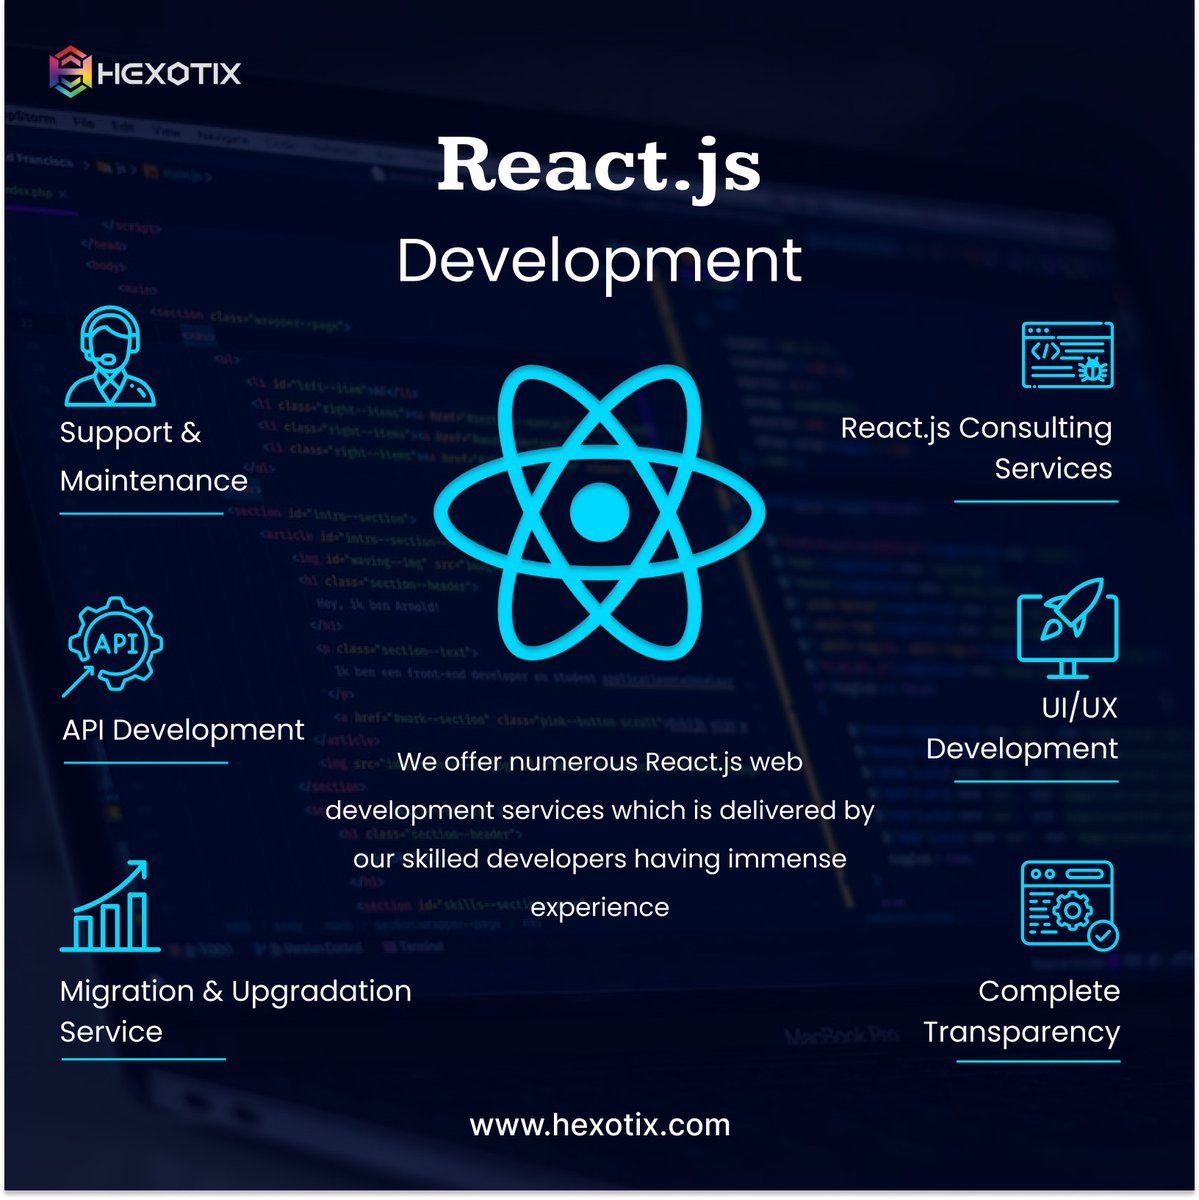 Hexotix delivers stable and scalable react js solutions with dynamic user interfaces that combine robust functionality and supreme visuals.

#hexotix #react #reactjsdeveloper #reactdev #javascript #react.js #currentopenings #currentlyhiring #jobvacancy #itandsoftware #wearehiring